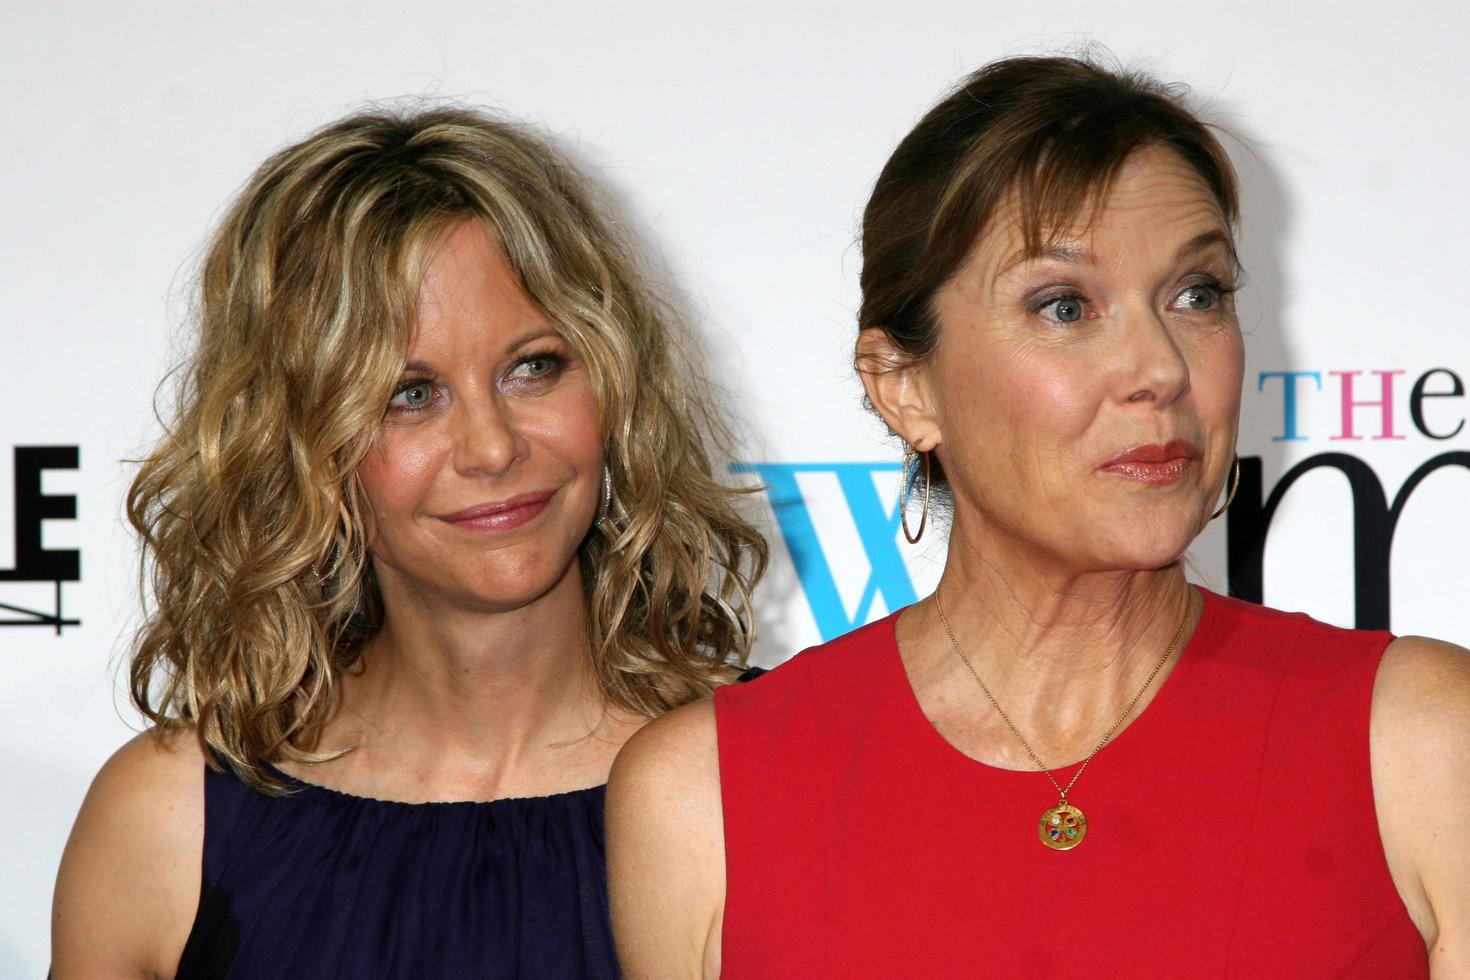 Meg Ryan and Annette Bening  arriving at the premiere of The Women at Manns Village Theater in WestwoodCA onSeptember 4 20082008 photo